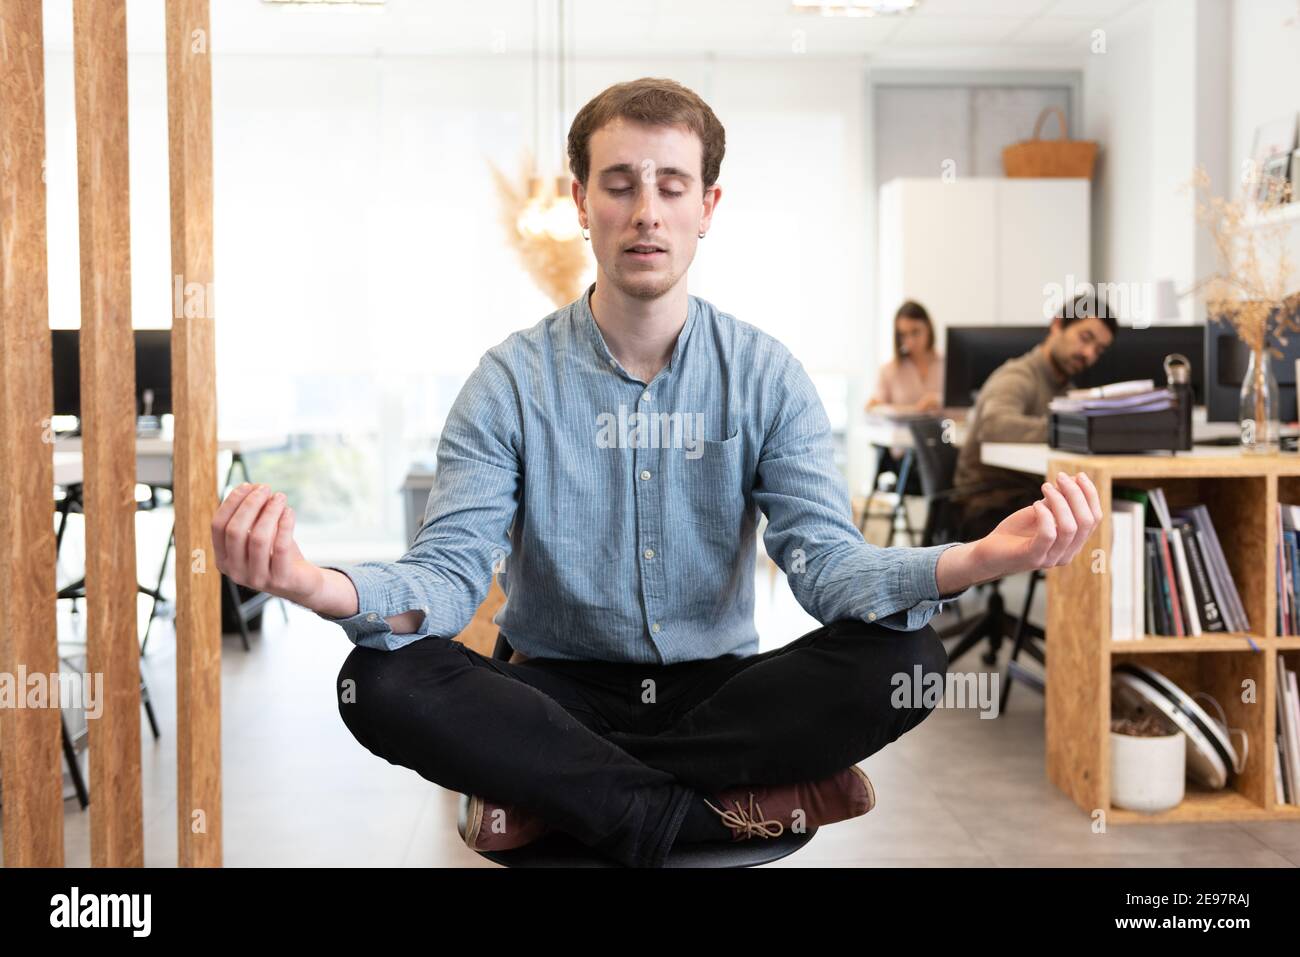 Handsome man meditating while sitting crossed legs on a chair in the office. Stock Photo